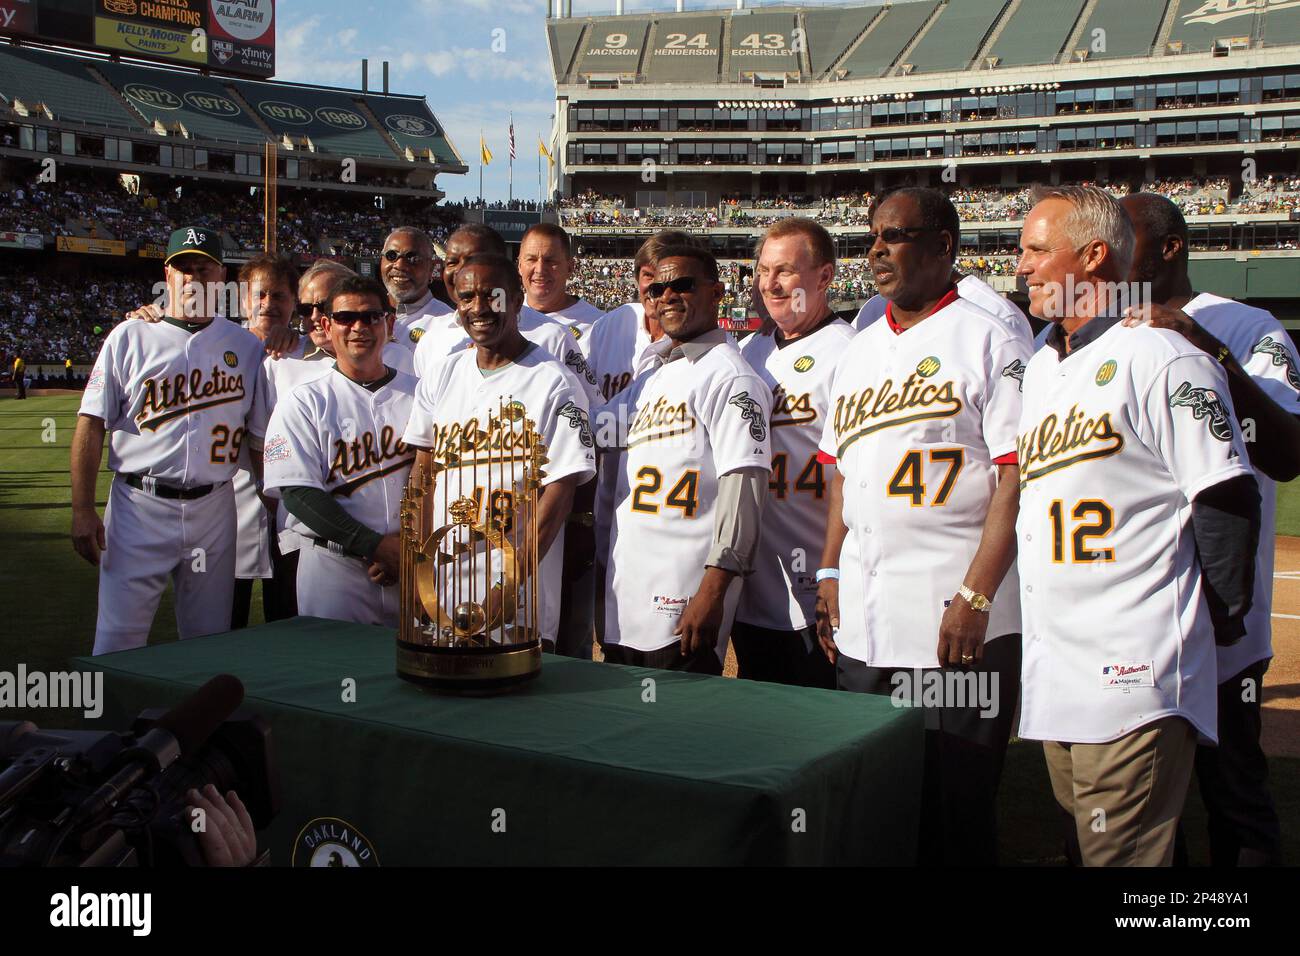 Champs By The Bay: 1989 Oakland Athletics and San Francisco Giants 